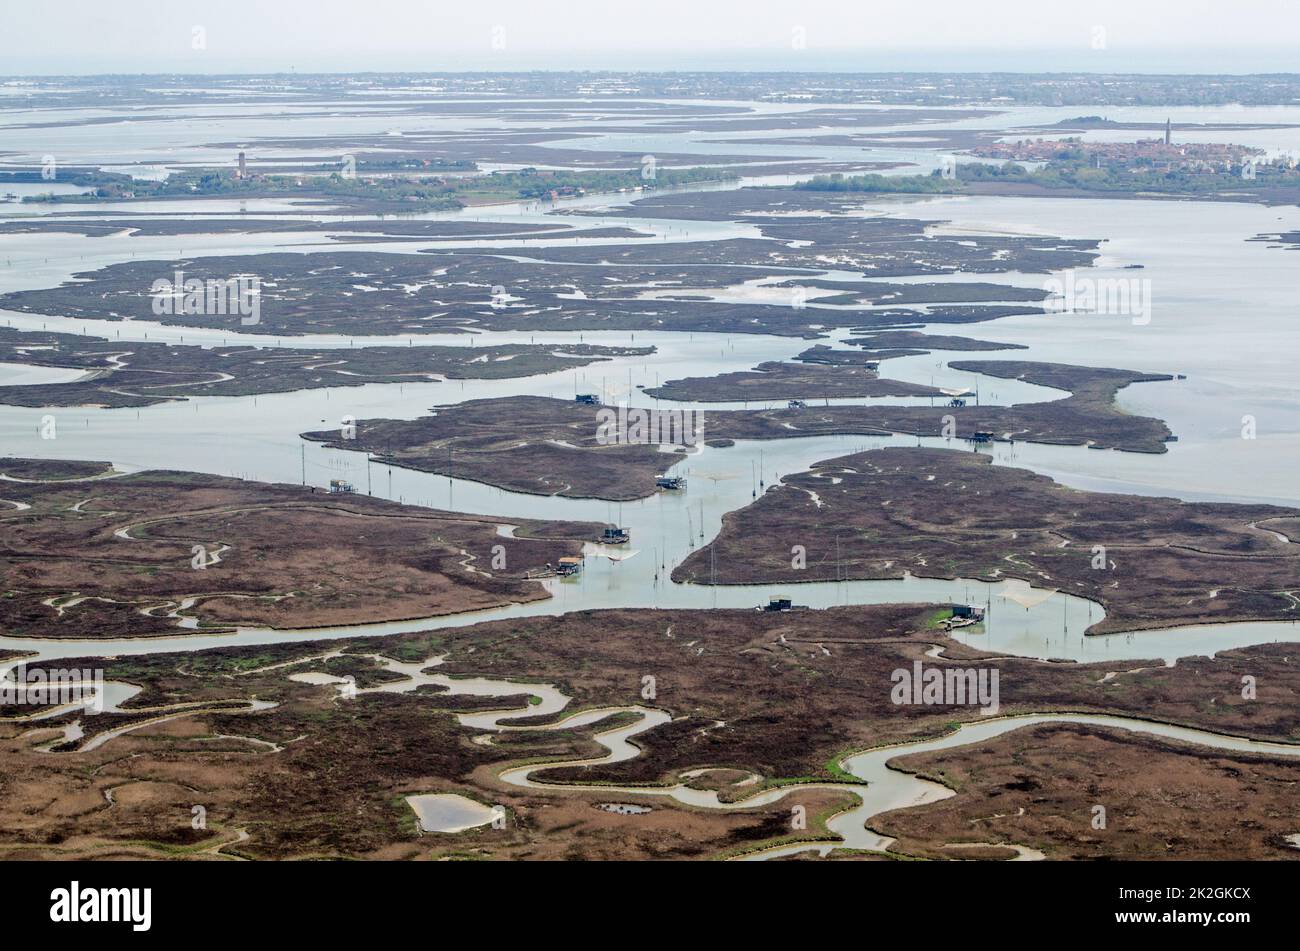 View from the air of the northern Venetian Lagoon with the islands of Torcello, Mazorbo and Burano. Stock Photo